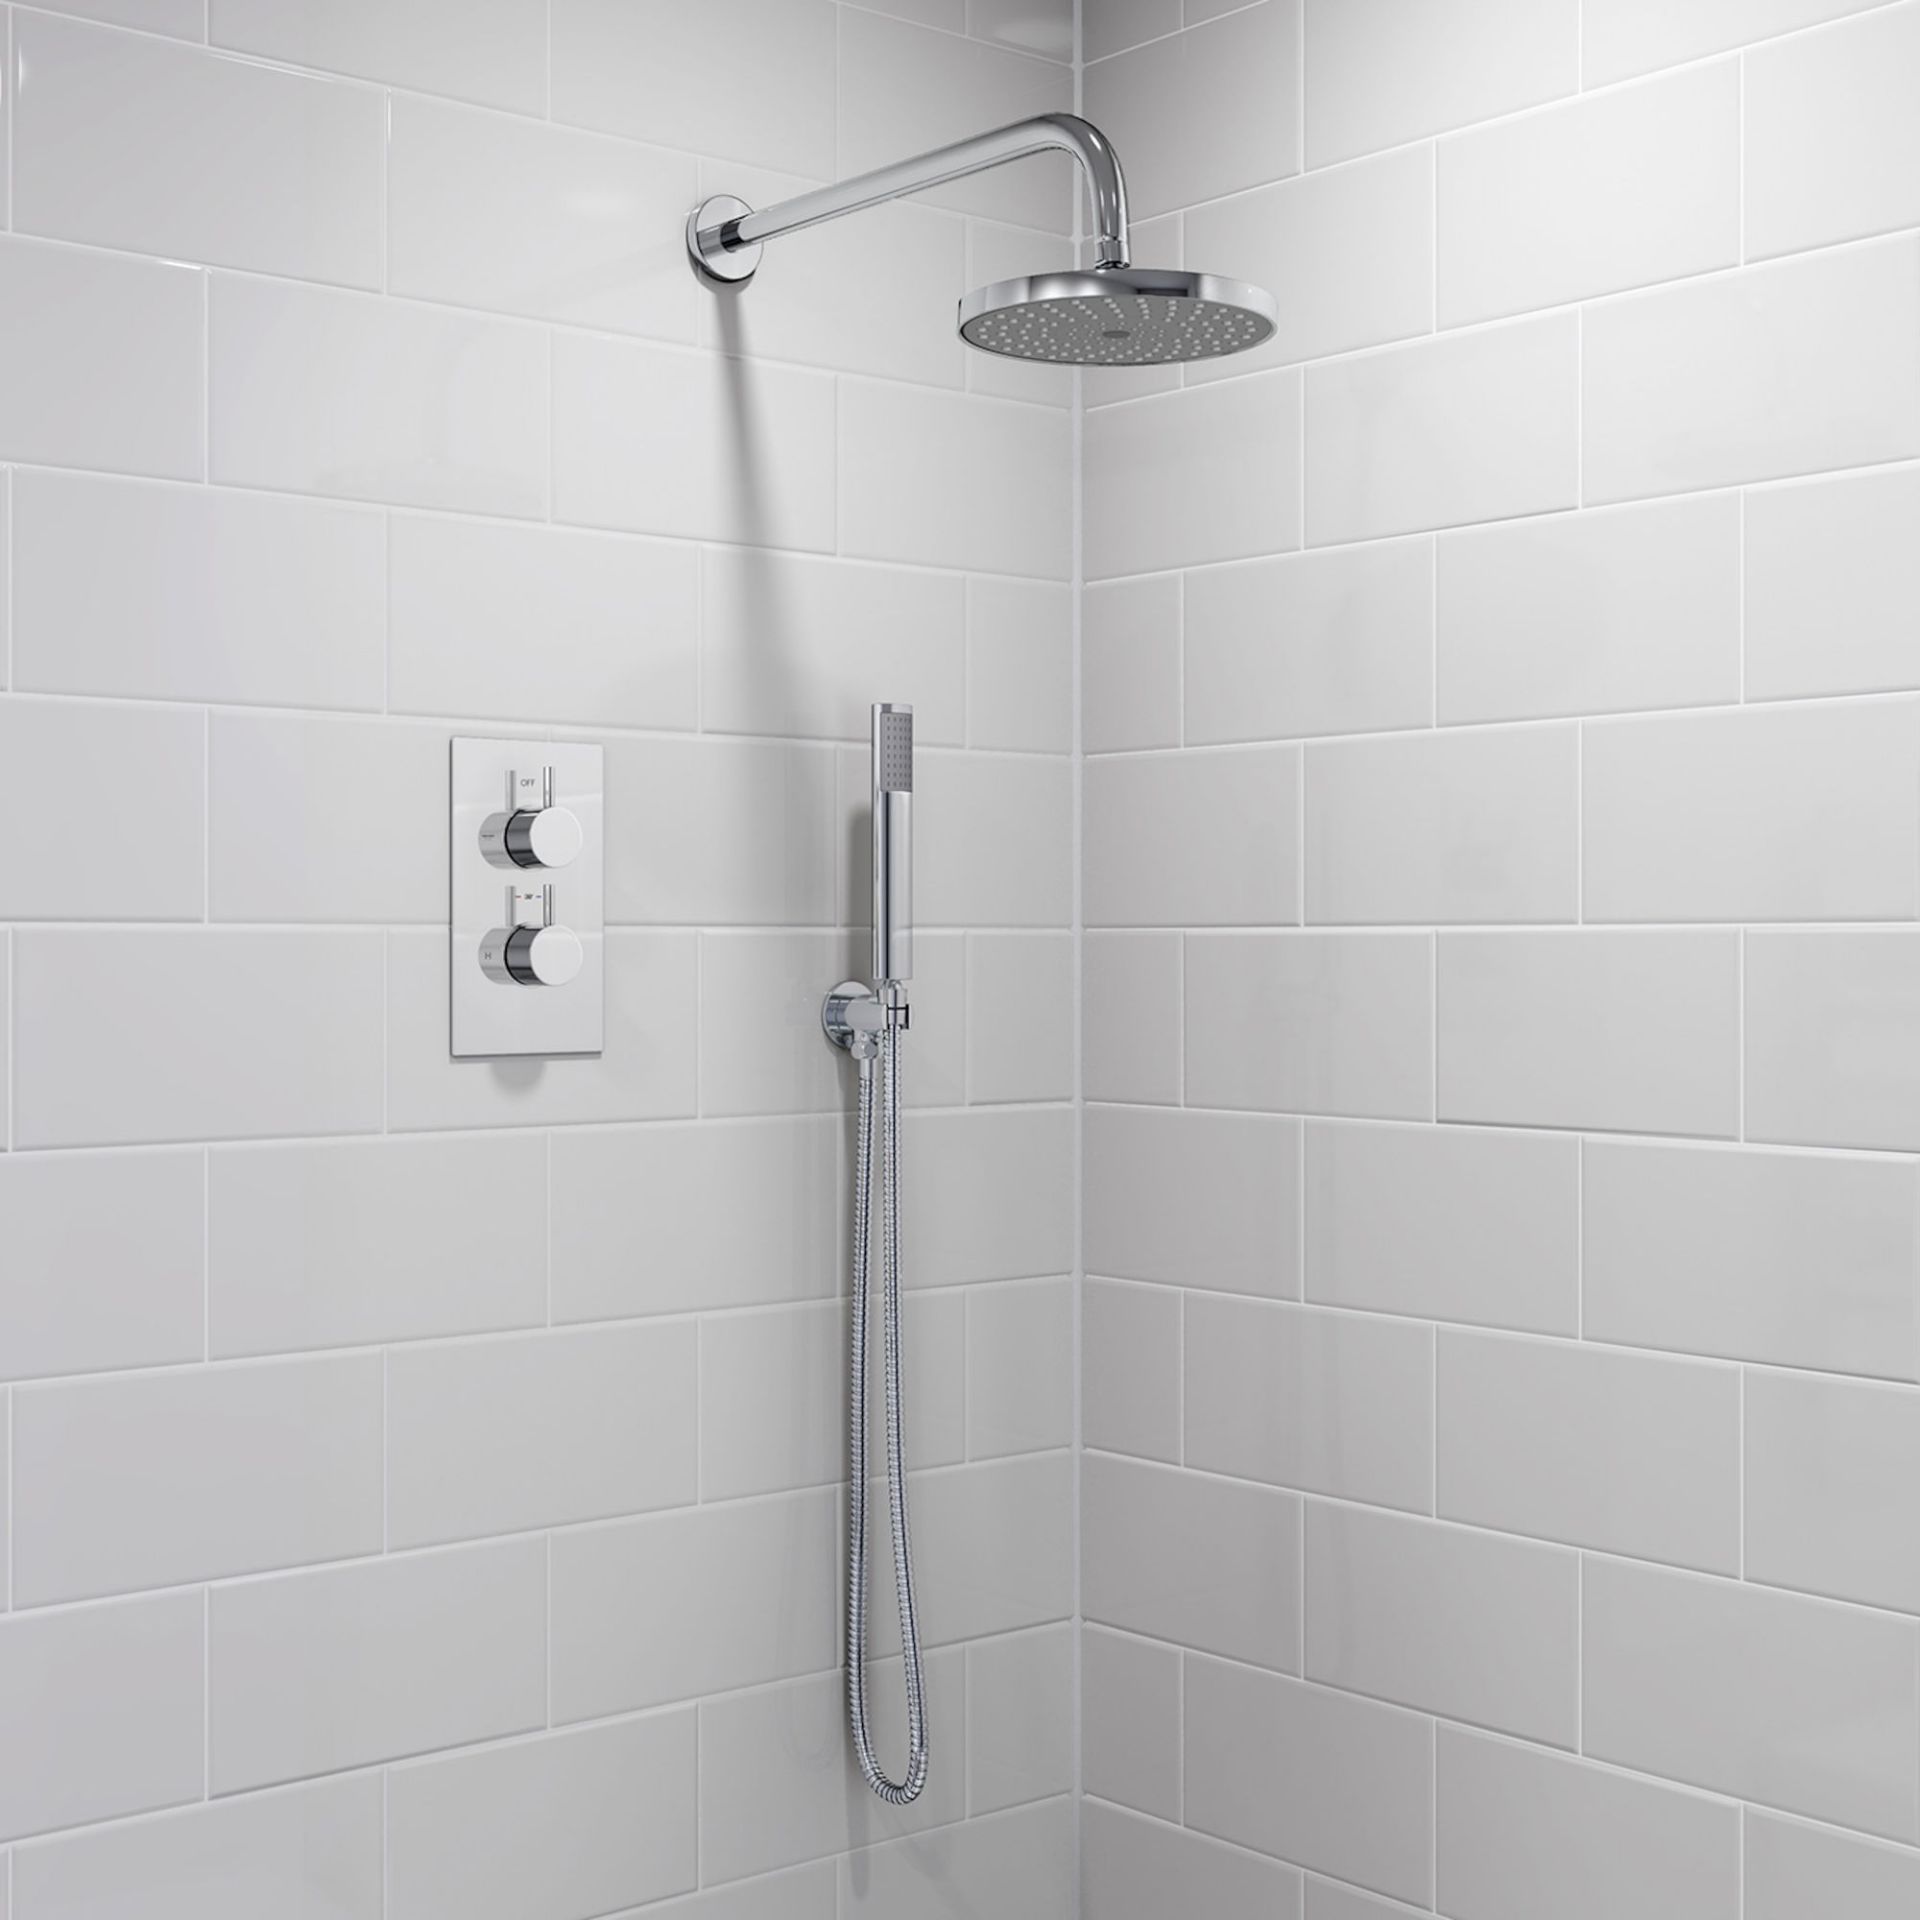 (DK49) Round Concealed Thermostatic Mixer Shower Kit & Medium Head. Family friendly detachable - Image 3 of 5